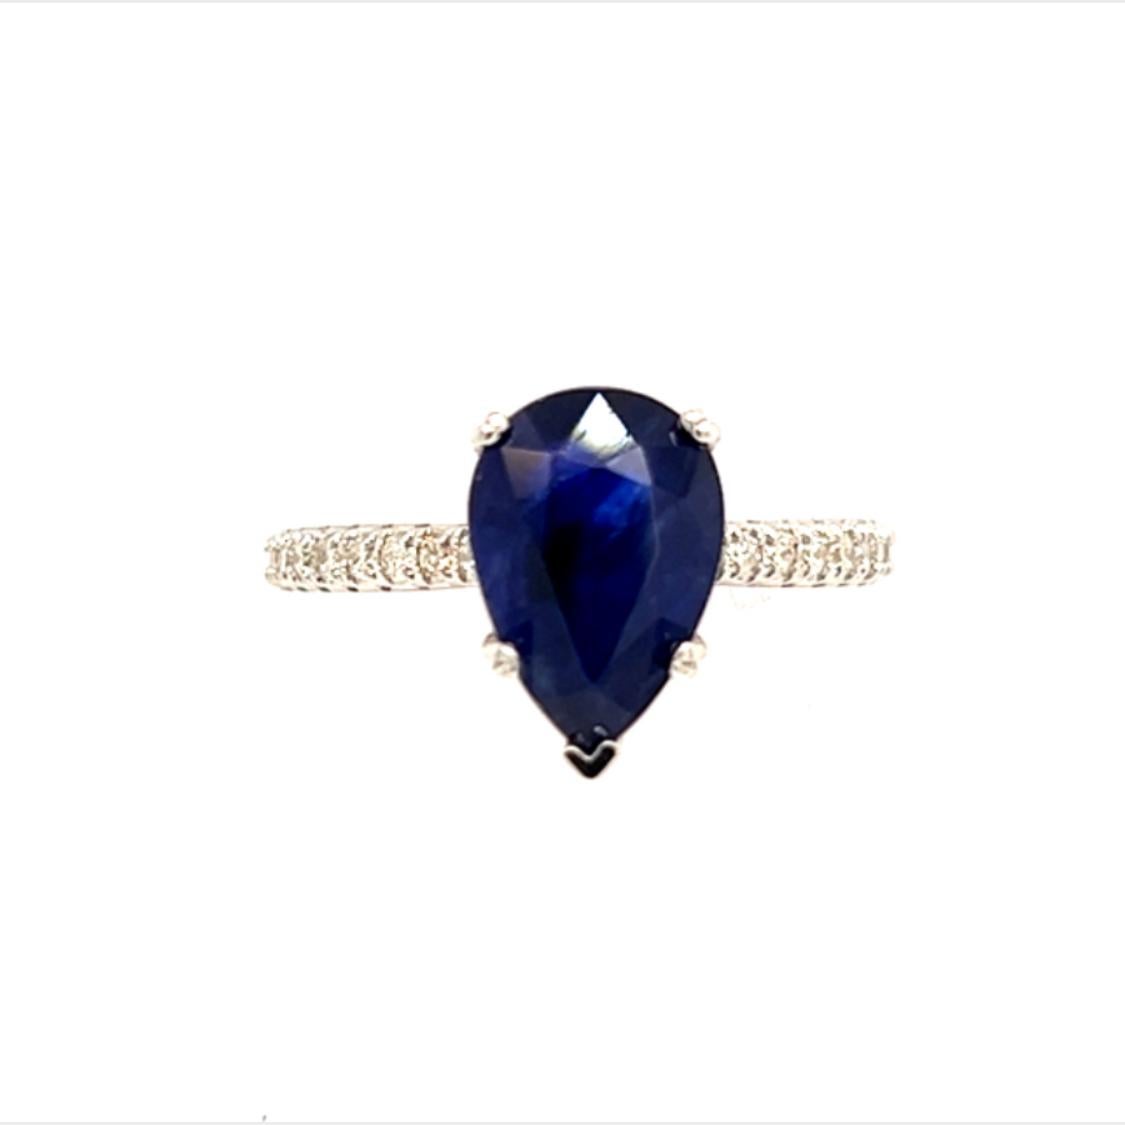 Sapphire Diamond Ring Size 6.5 14k Gold 2.77 TCW Certified For Sale 5